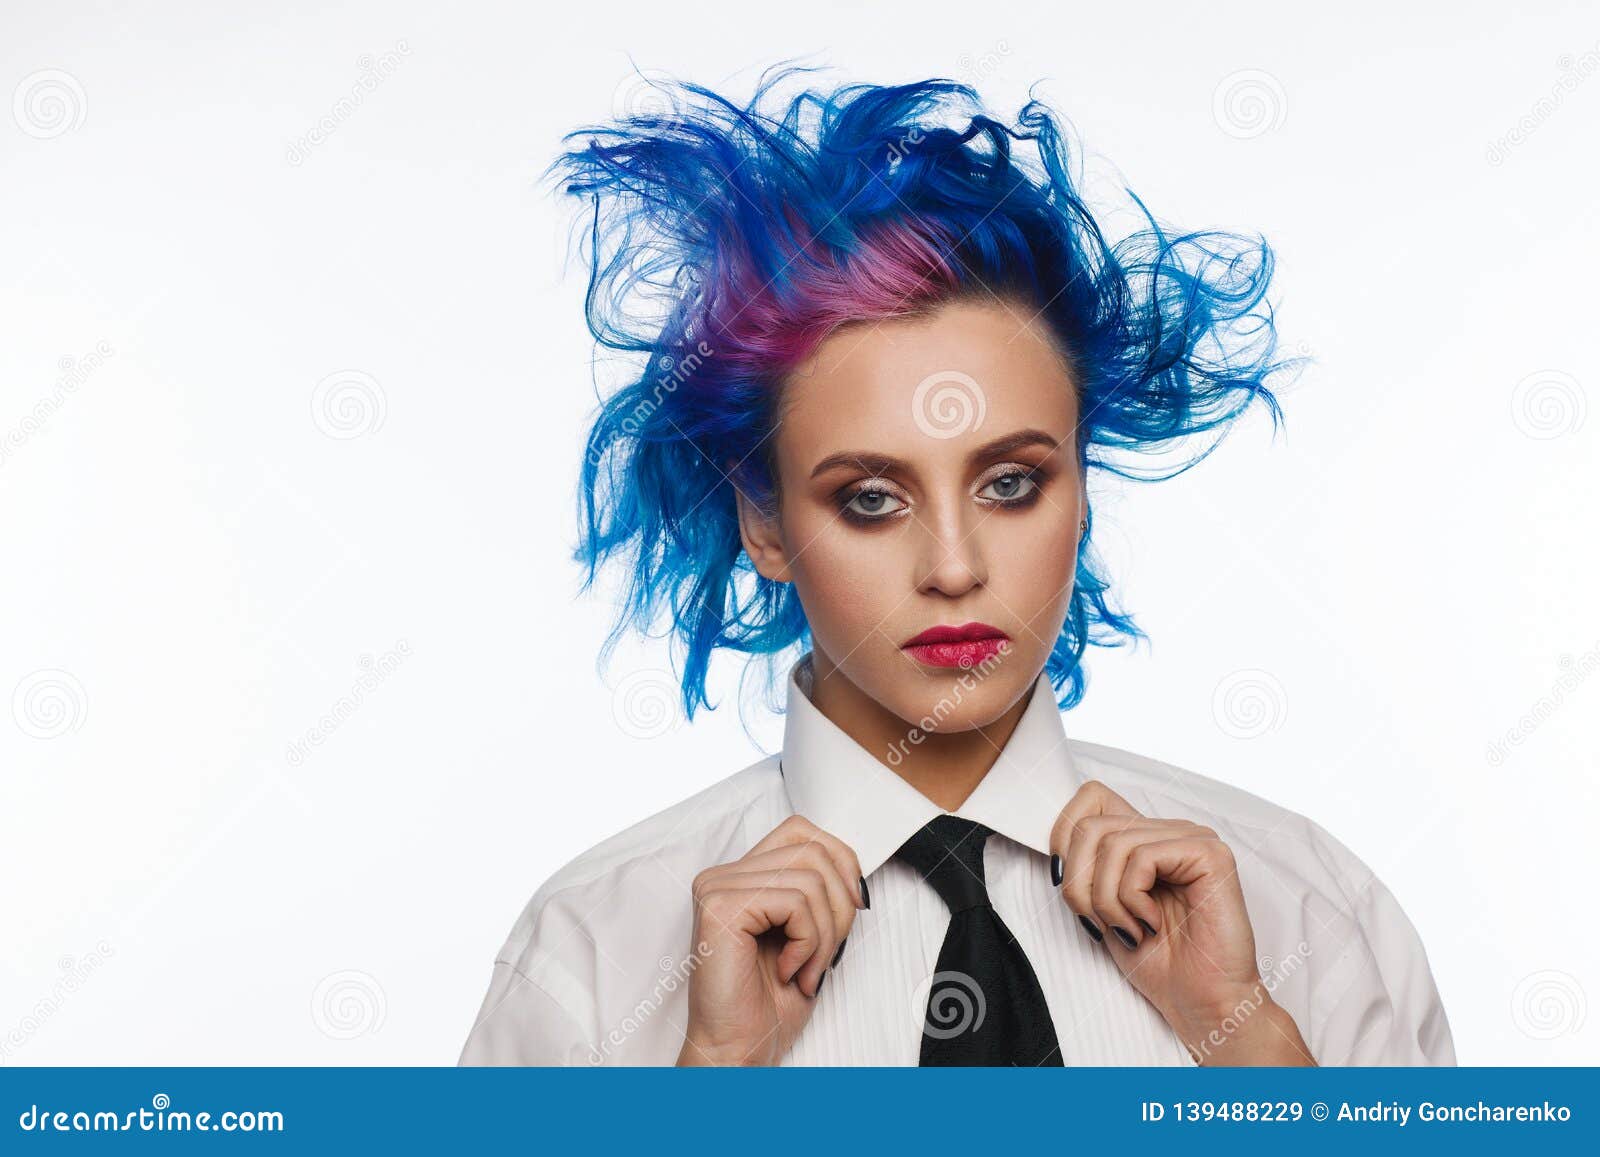 Dark Blue and Pink Hair Inspiration - wide 9